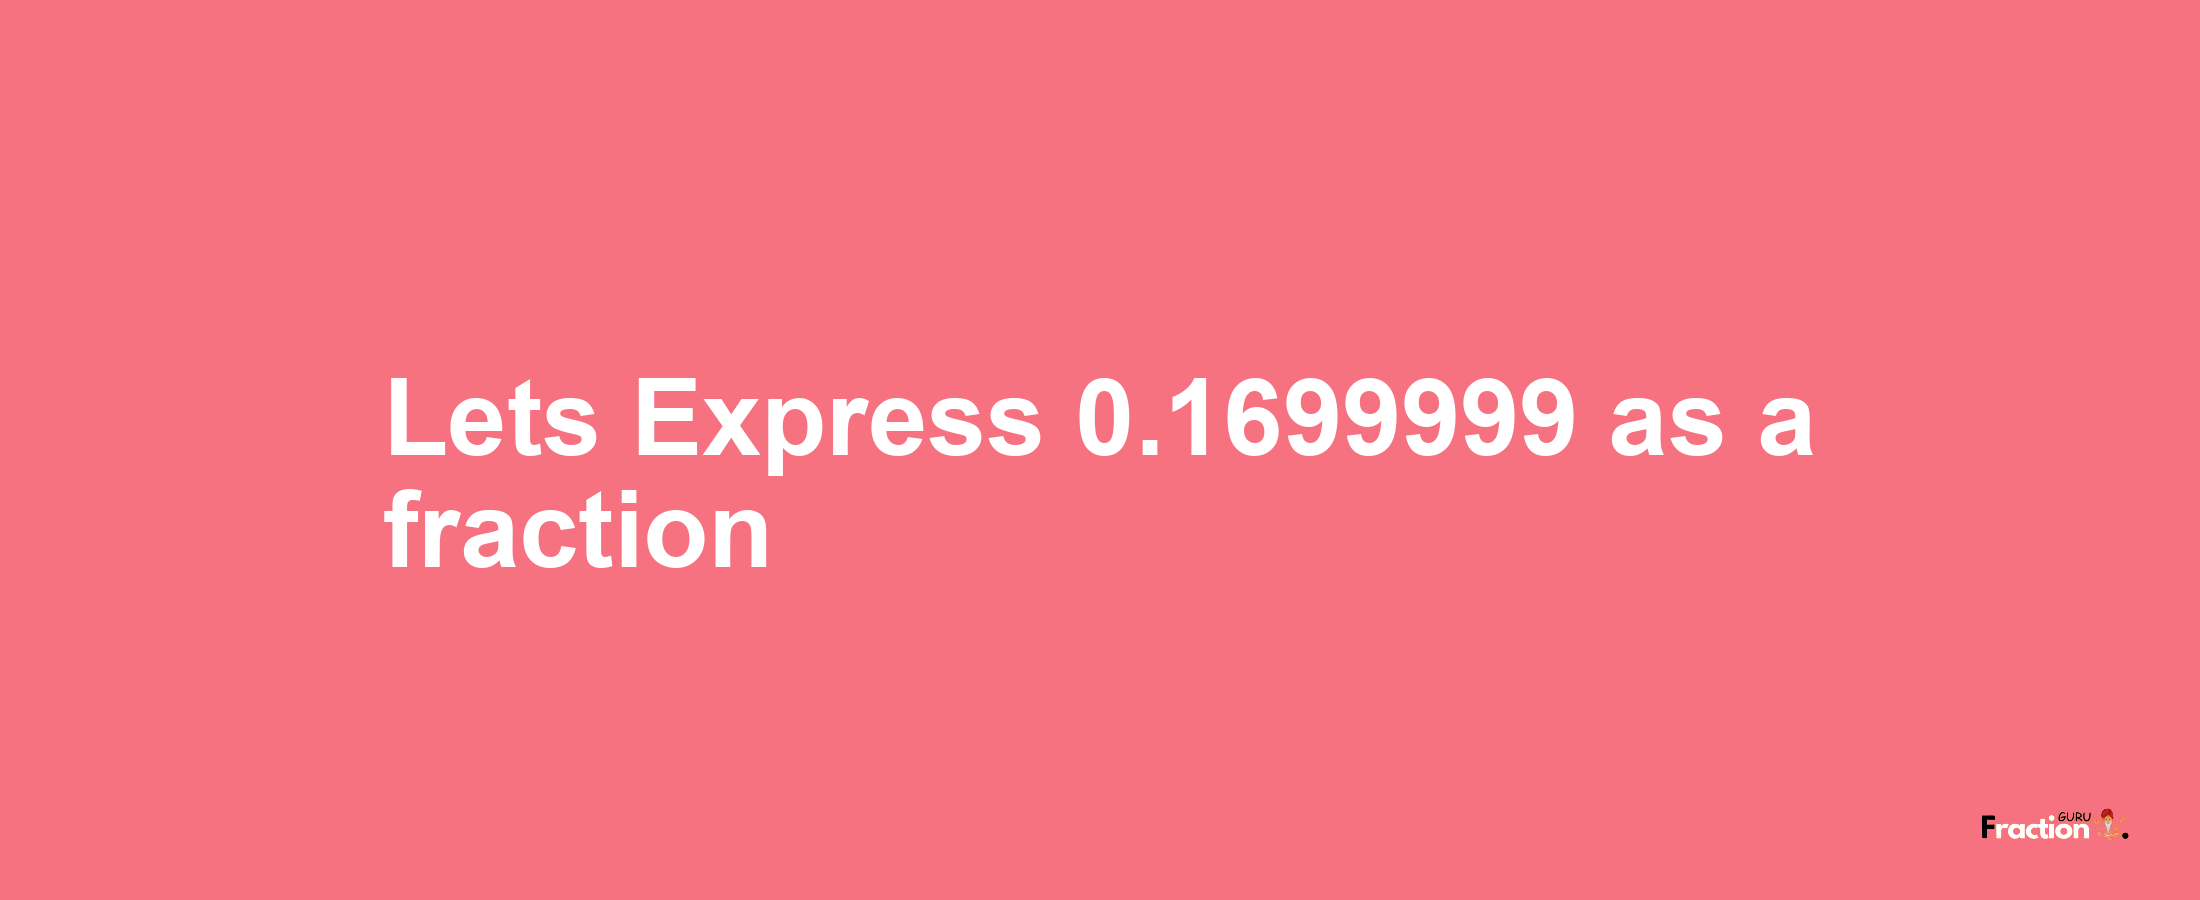 Lets Express 0.1699999 as afraction